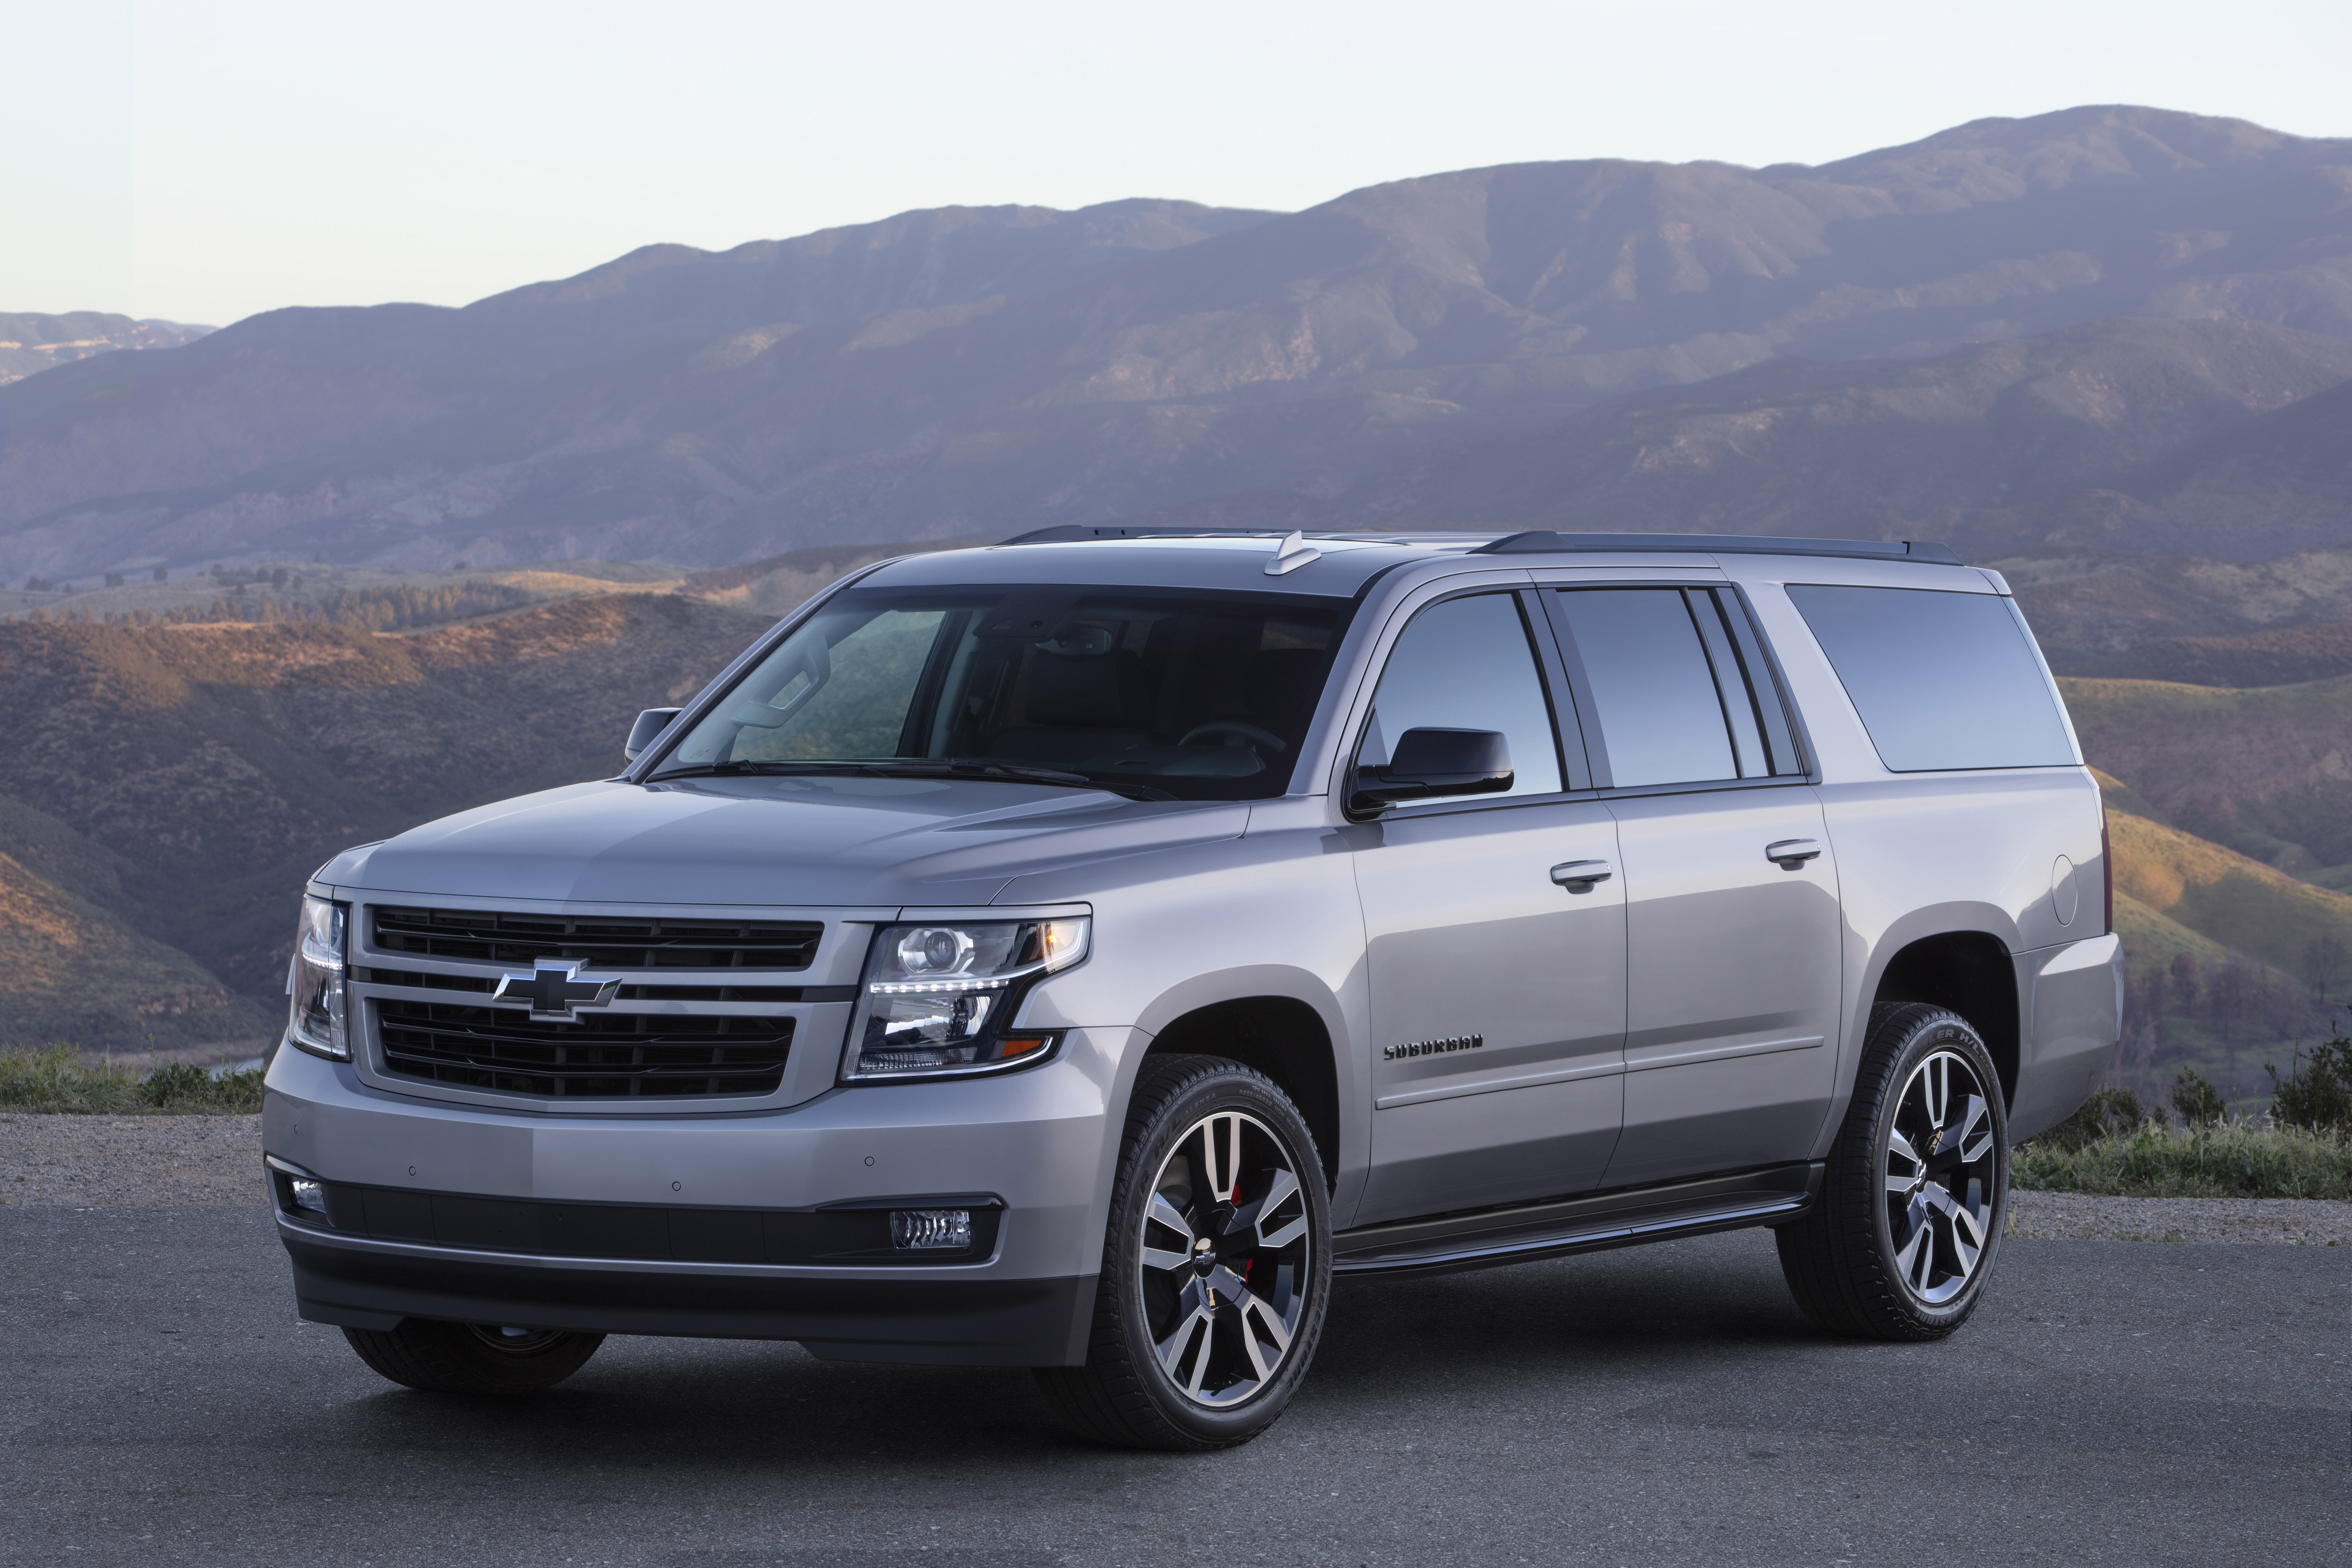 2019 Suburban RST Performance Package Brings V-8 Power and Style to  Chevrolet Full-Size SUVs